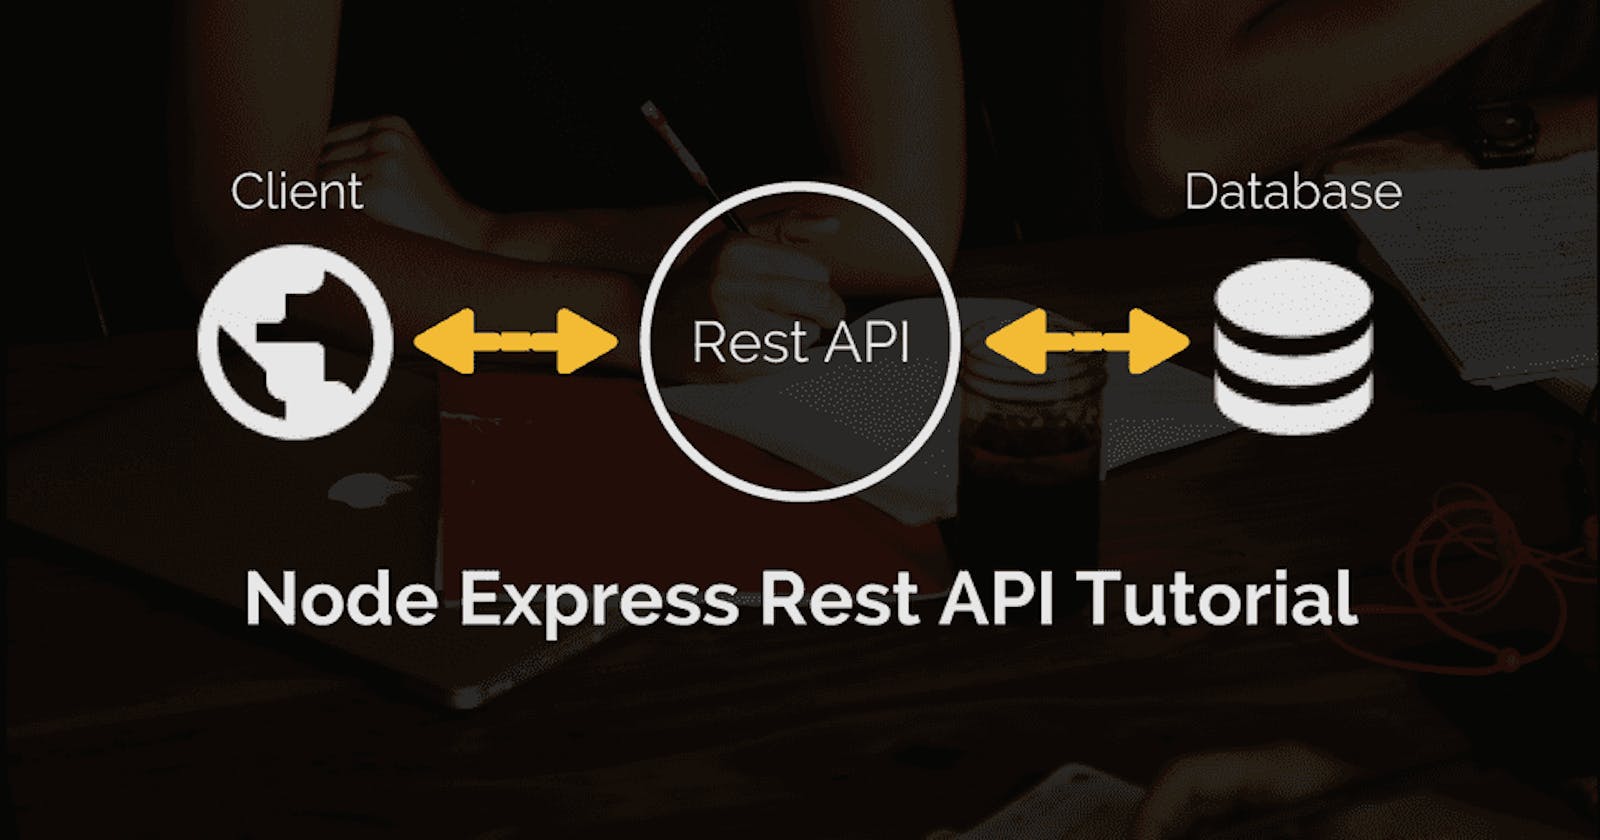 Build a RESTful API With Nodejs, Express, And MongoDB: Step-by-Step Guide